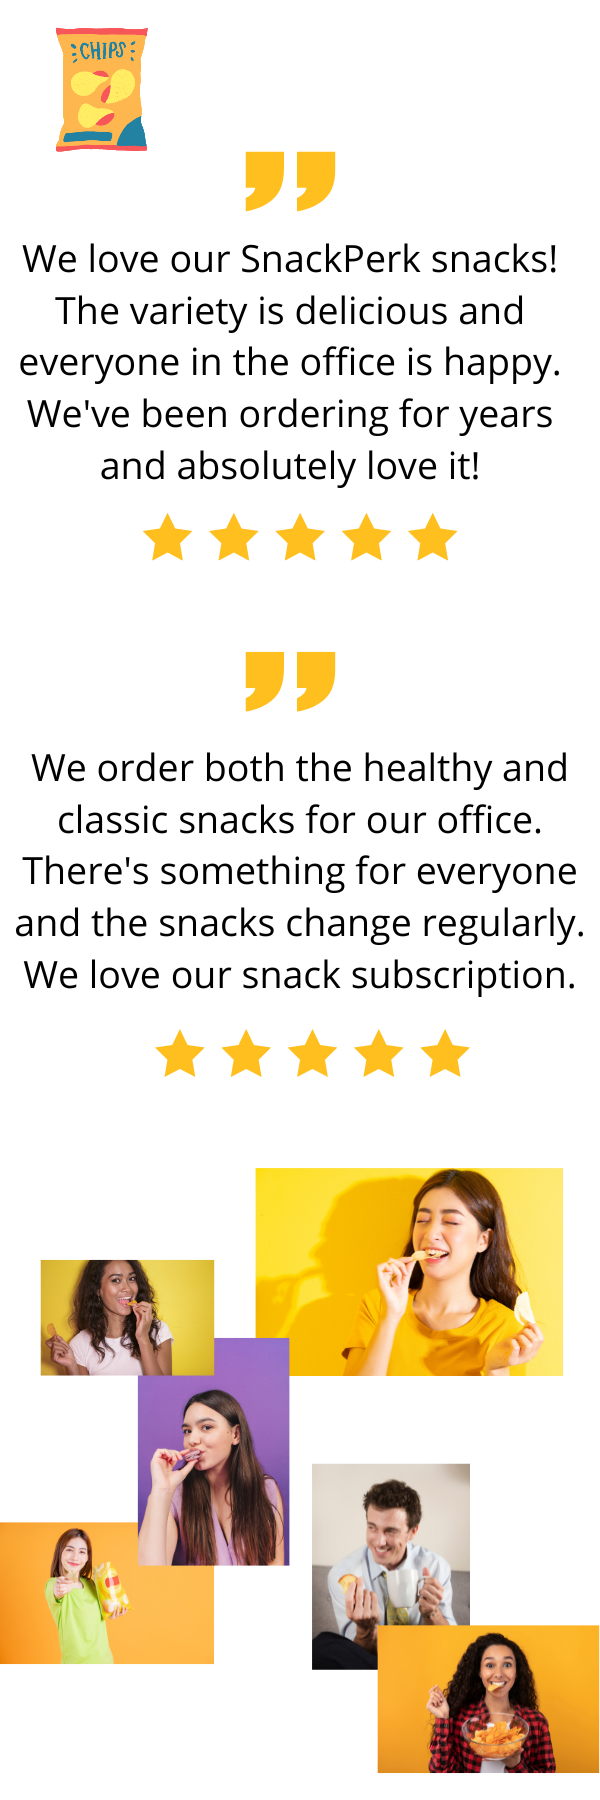 Healthy Office Snacks, Snack Delivery Service at Work